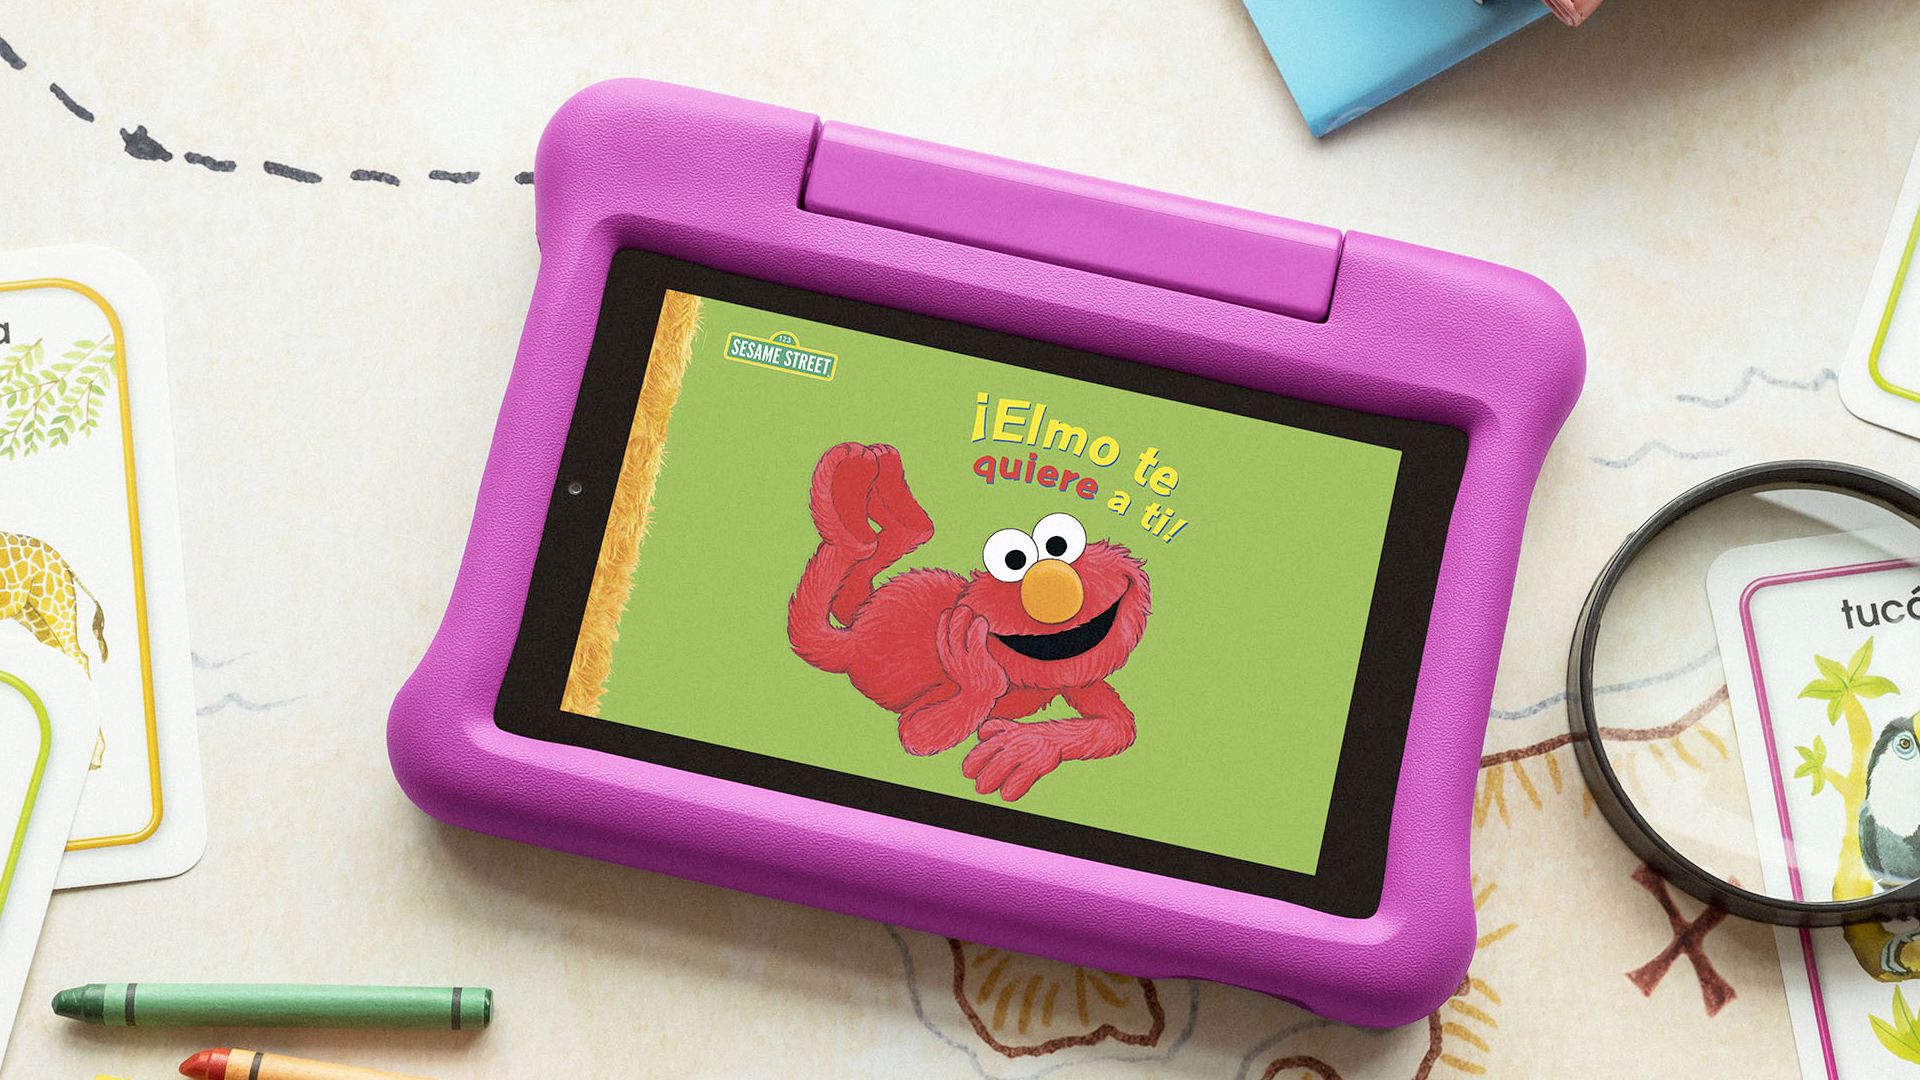 The Amazon Fire 7 Kids Edition tablet.